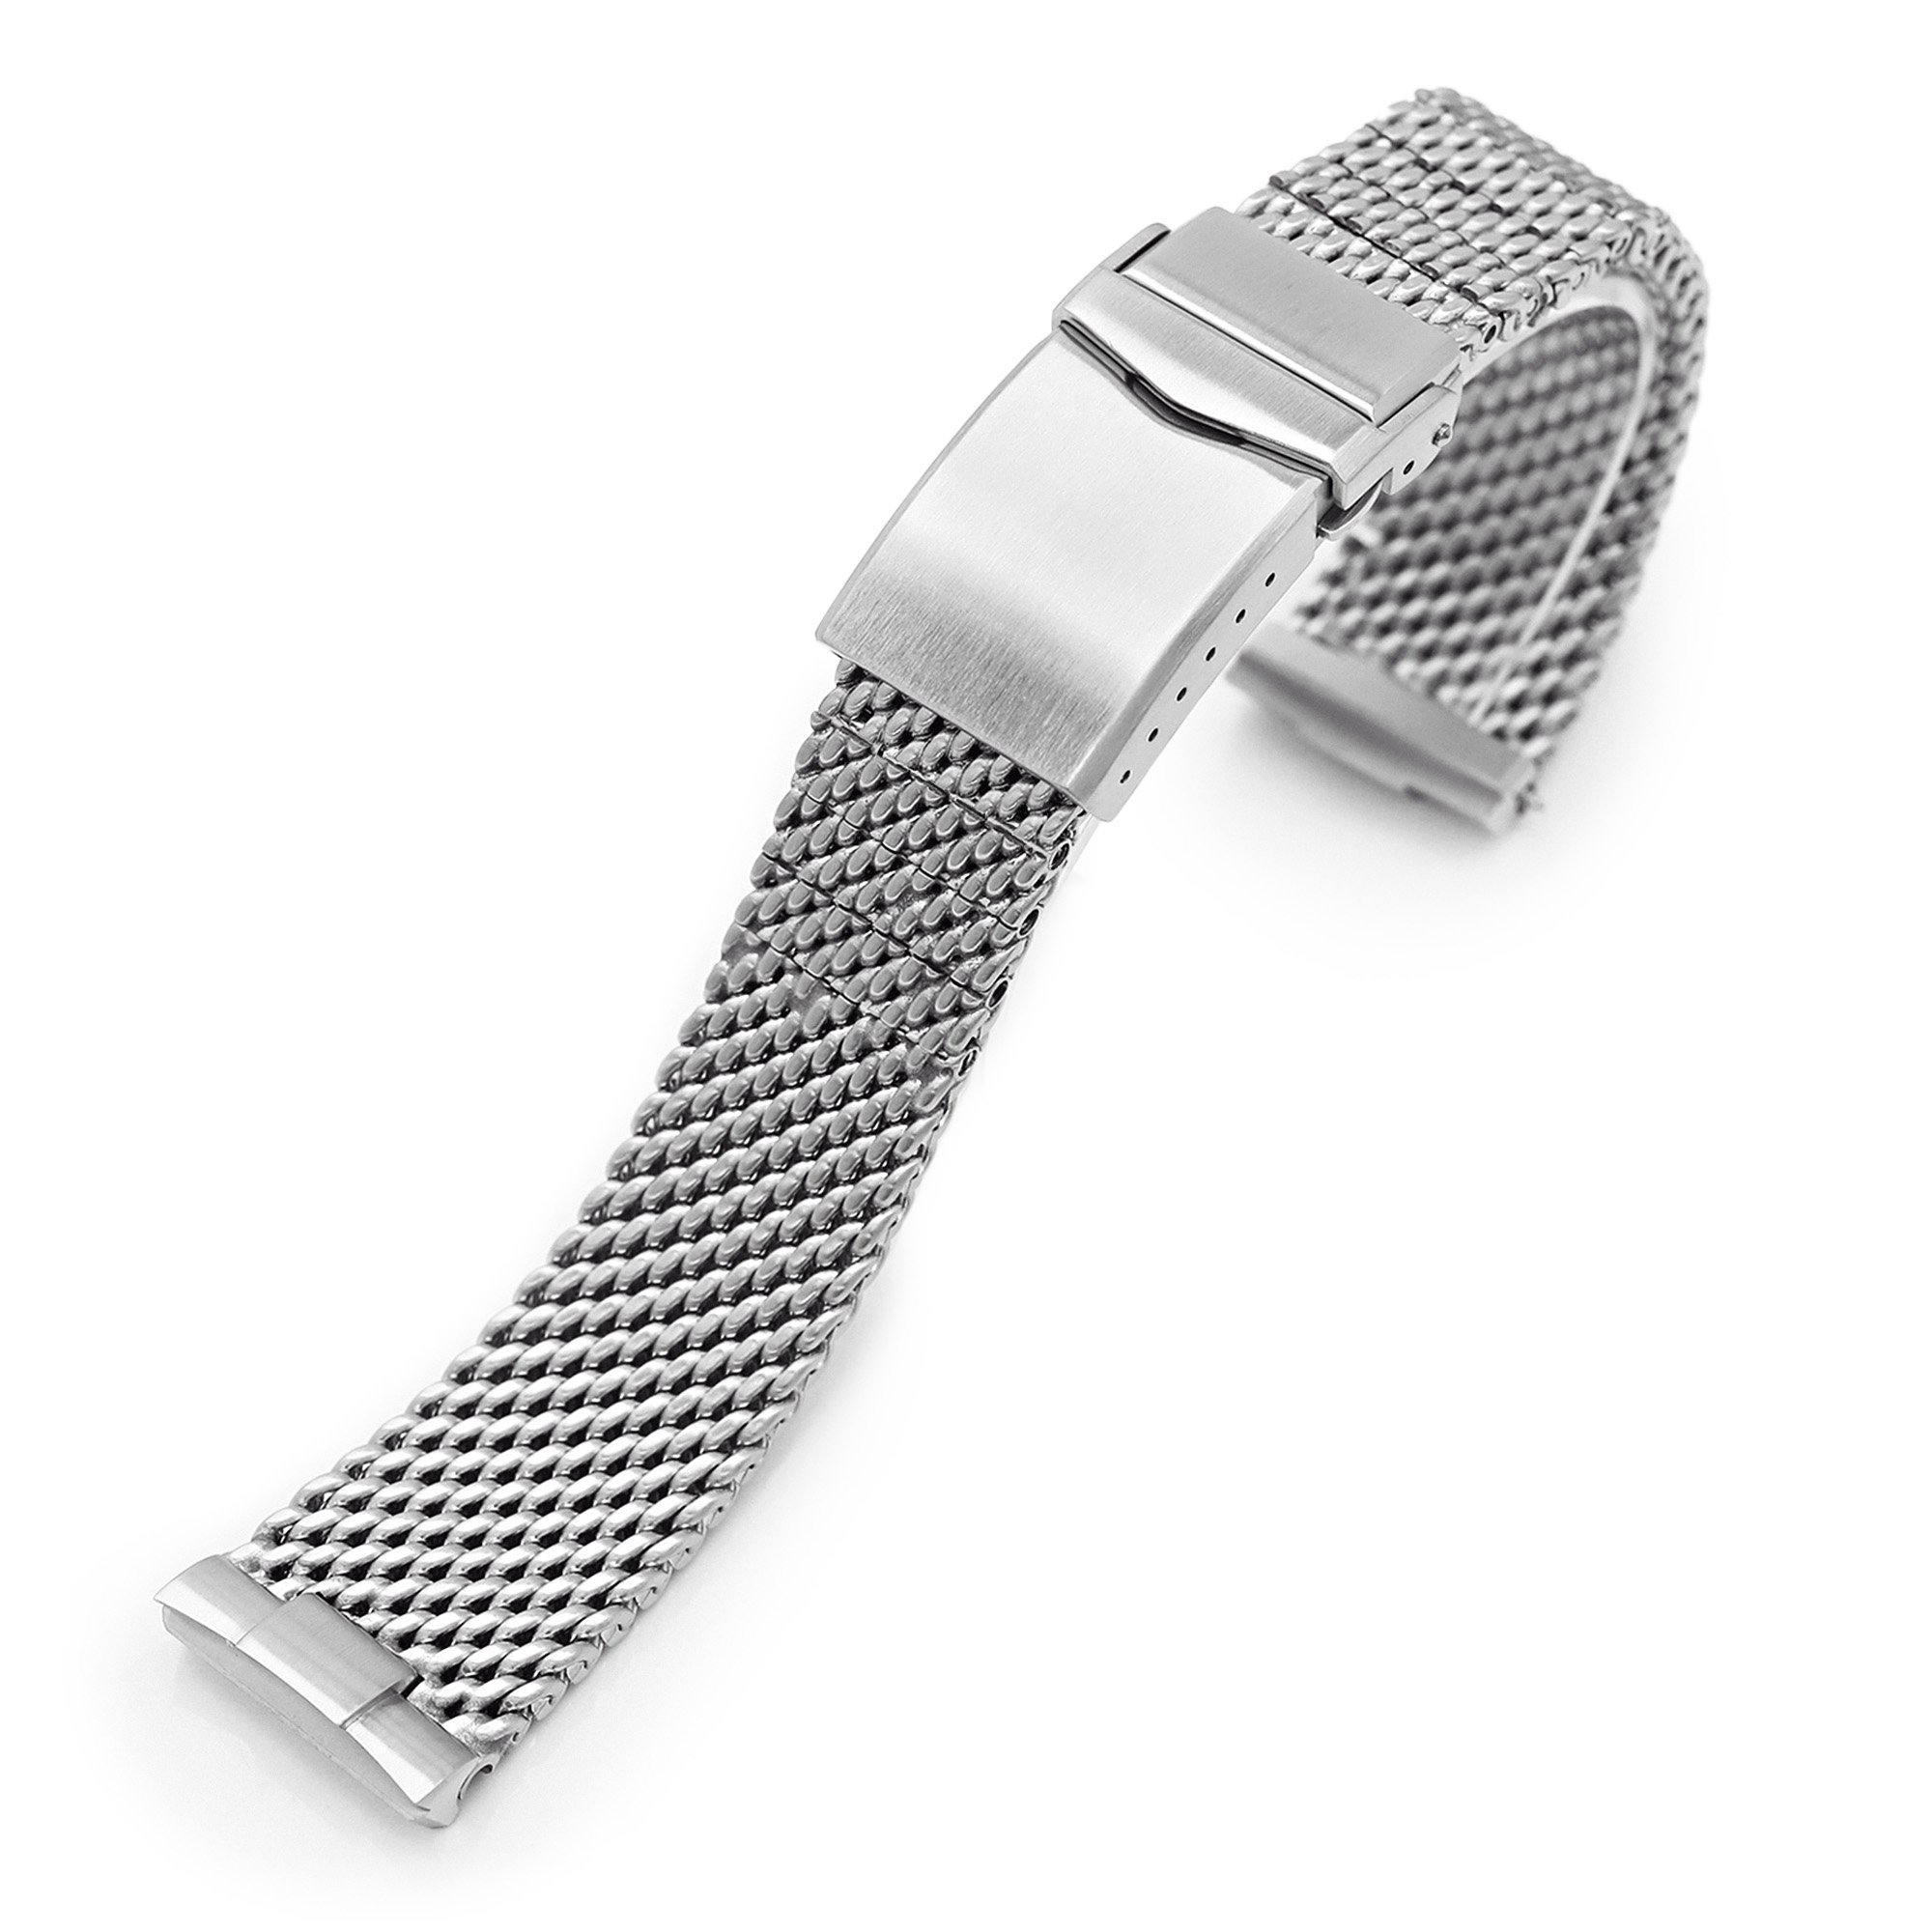 MiLTAT 22mm Watch Band for Seiko Turtle